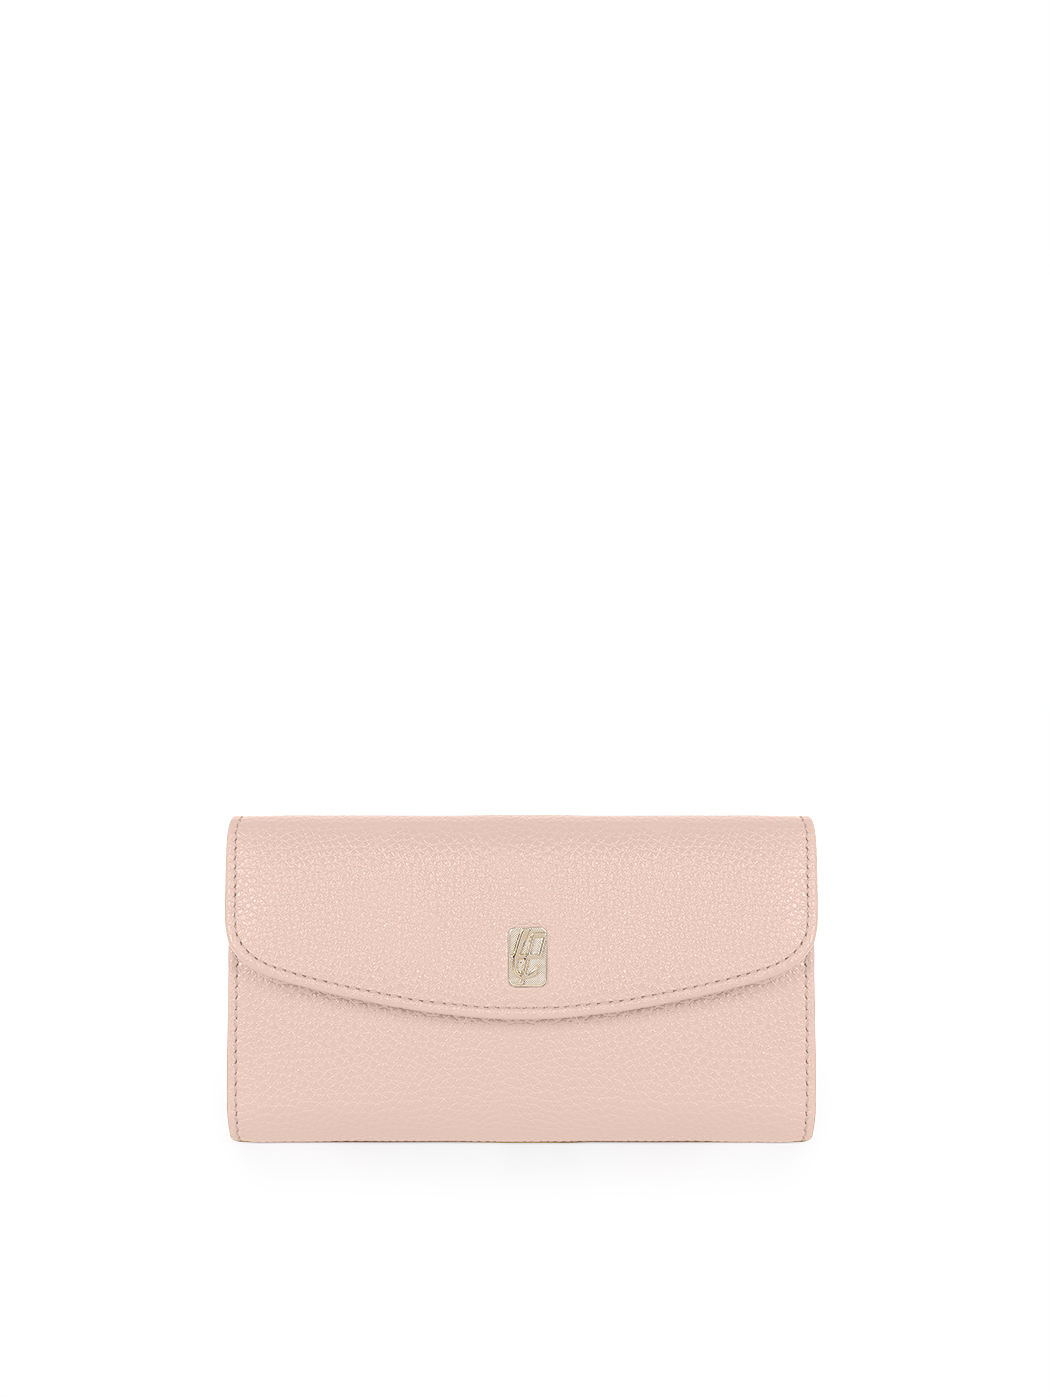 Long powder pink leather wallet